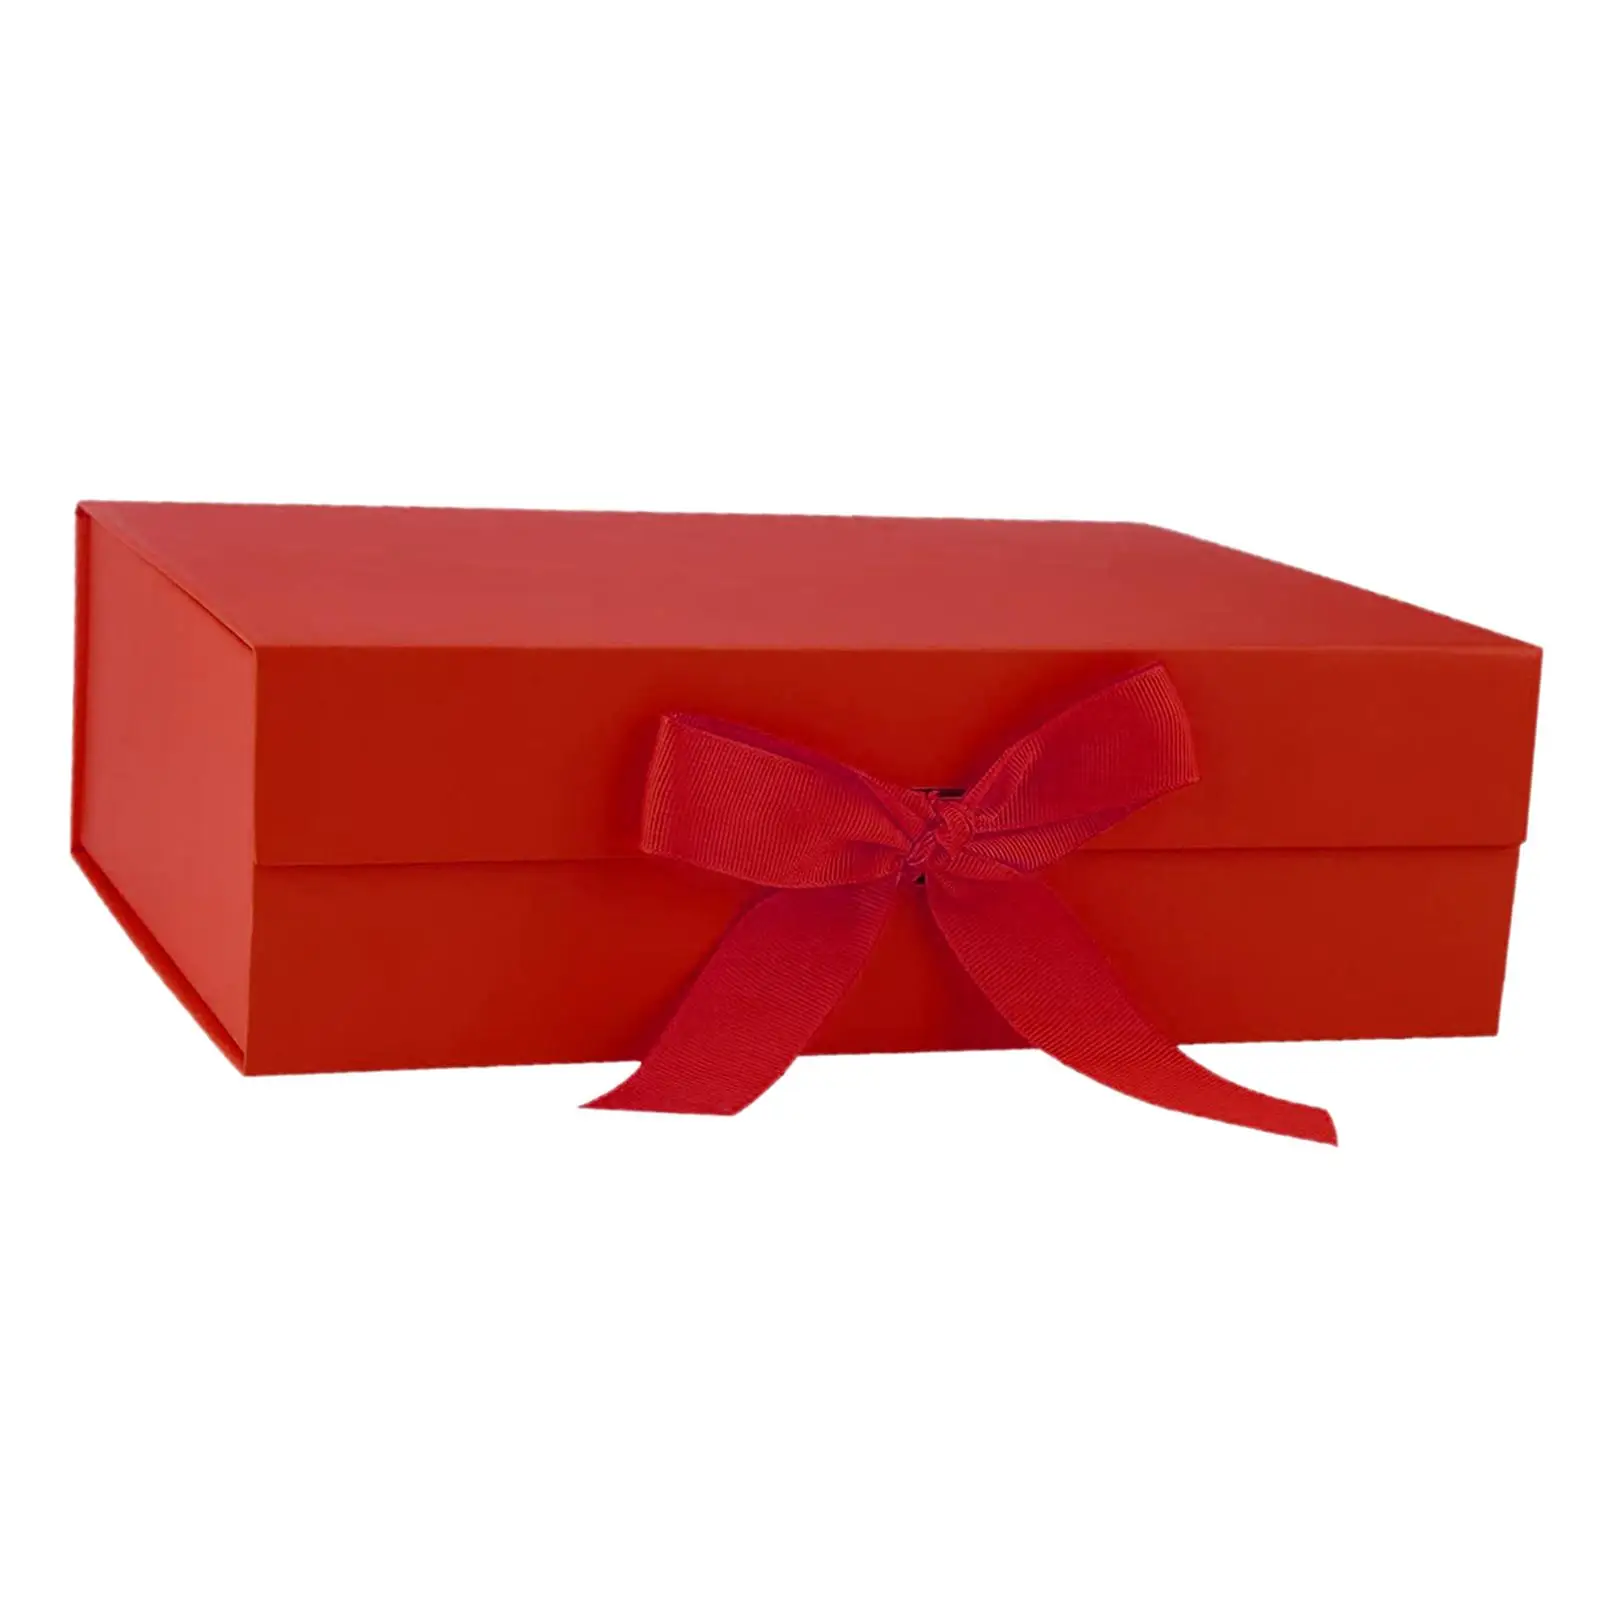 Gift Box with Ribbon Easy Assemble Reusable Large Storage Box for Wedding Keepsake Bridemaid Gifts Birthday Party Cupcake Boxes